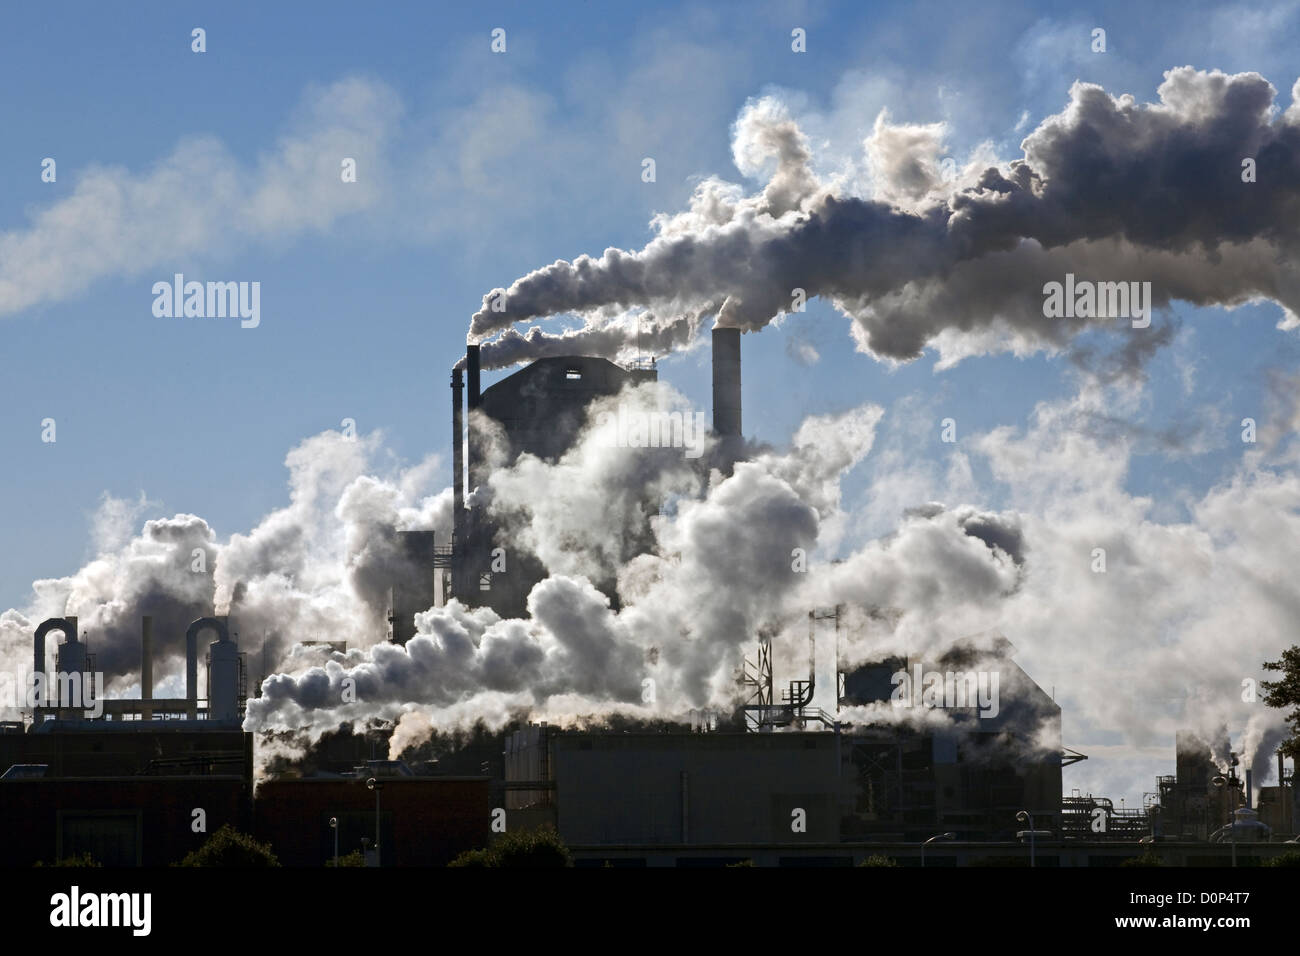 GA00132-00...GEORGIA - Smoke and steam issuing from multiple smokestacks at a fibers factory in the town of Jesup. Stock Photo